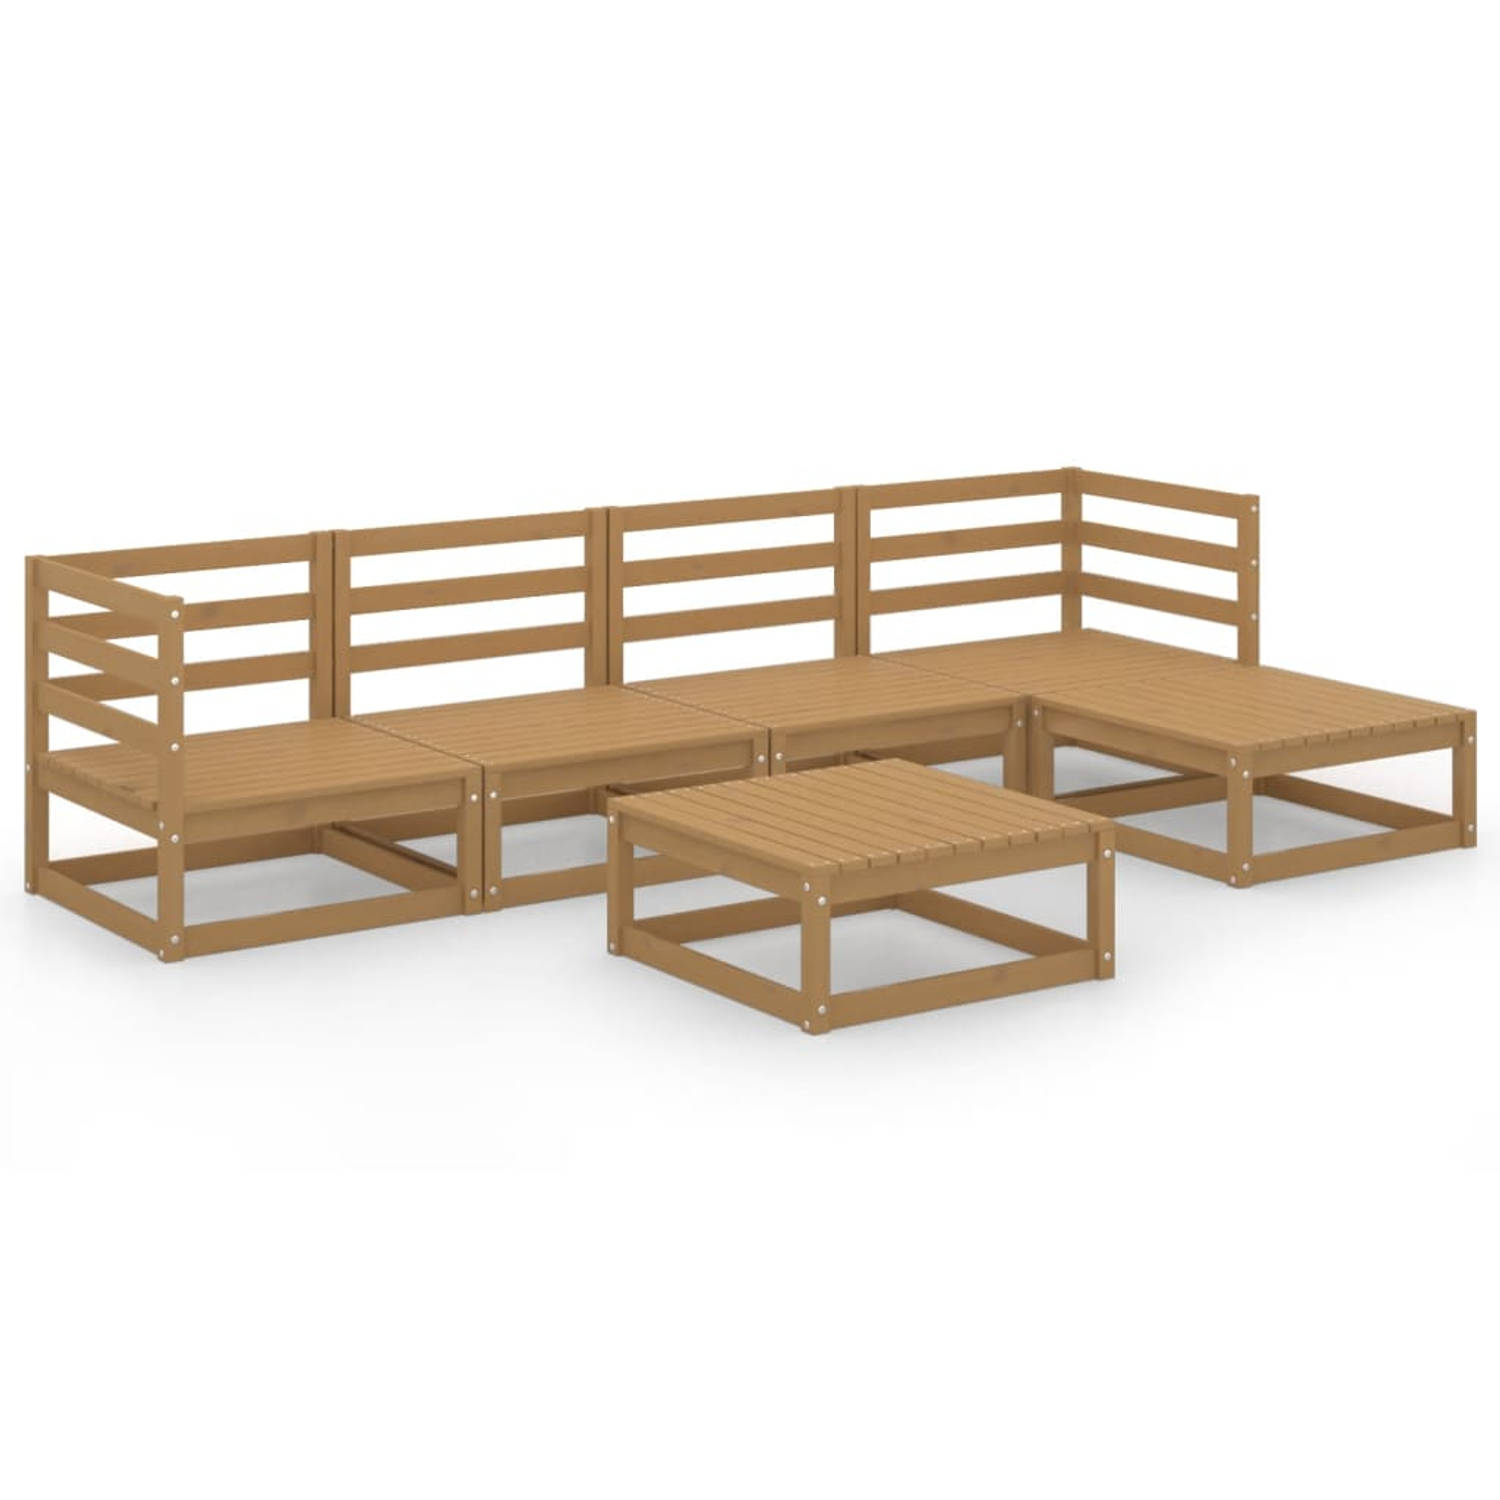 The Living Store 6-delige Loungeset massief grenenhout honingbruin - Tuinset